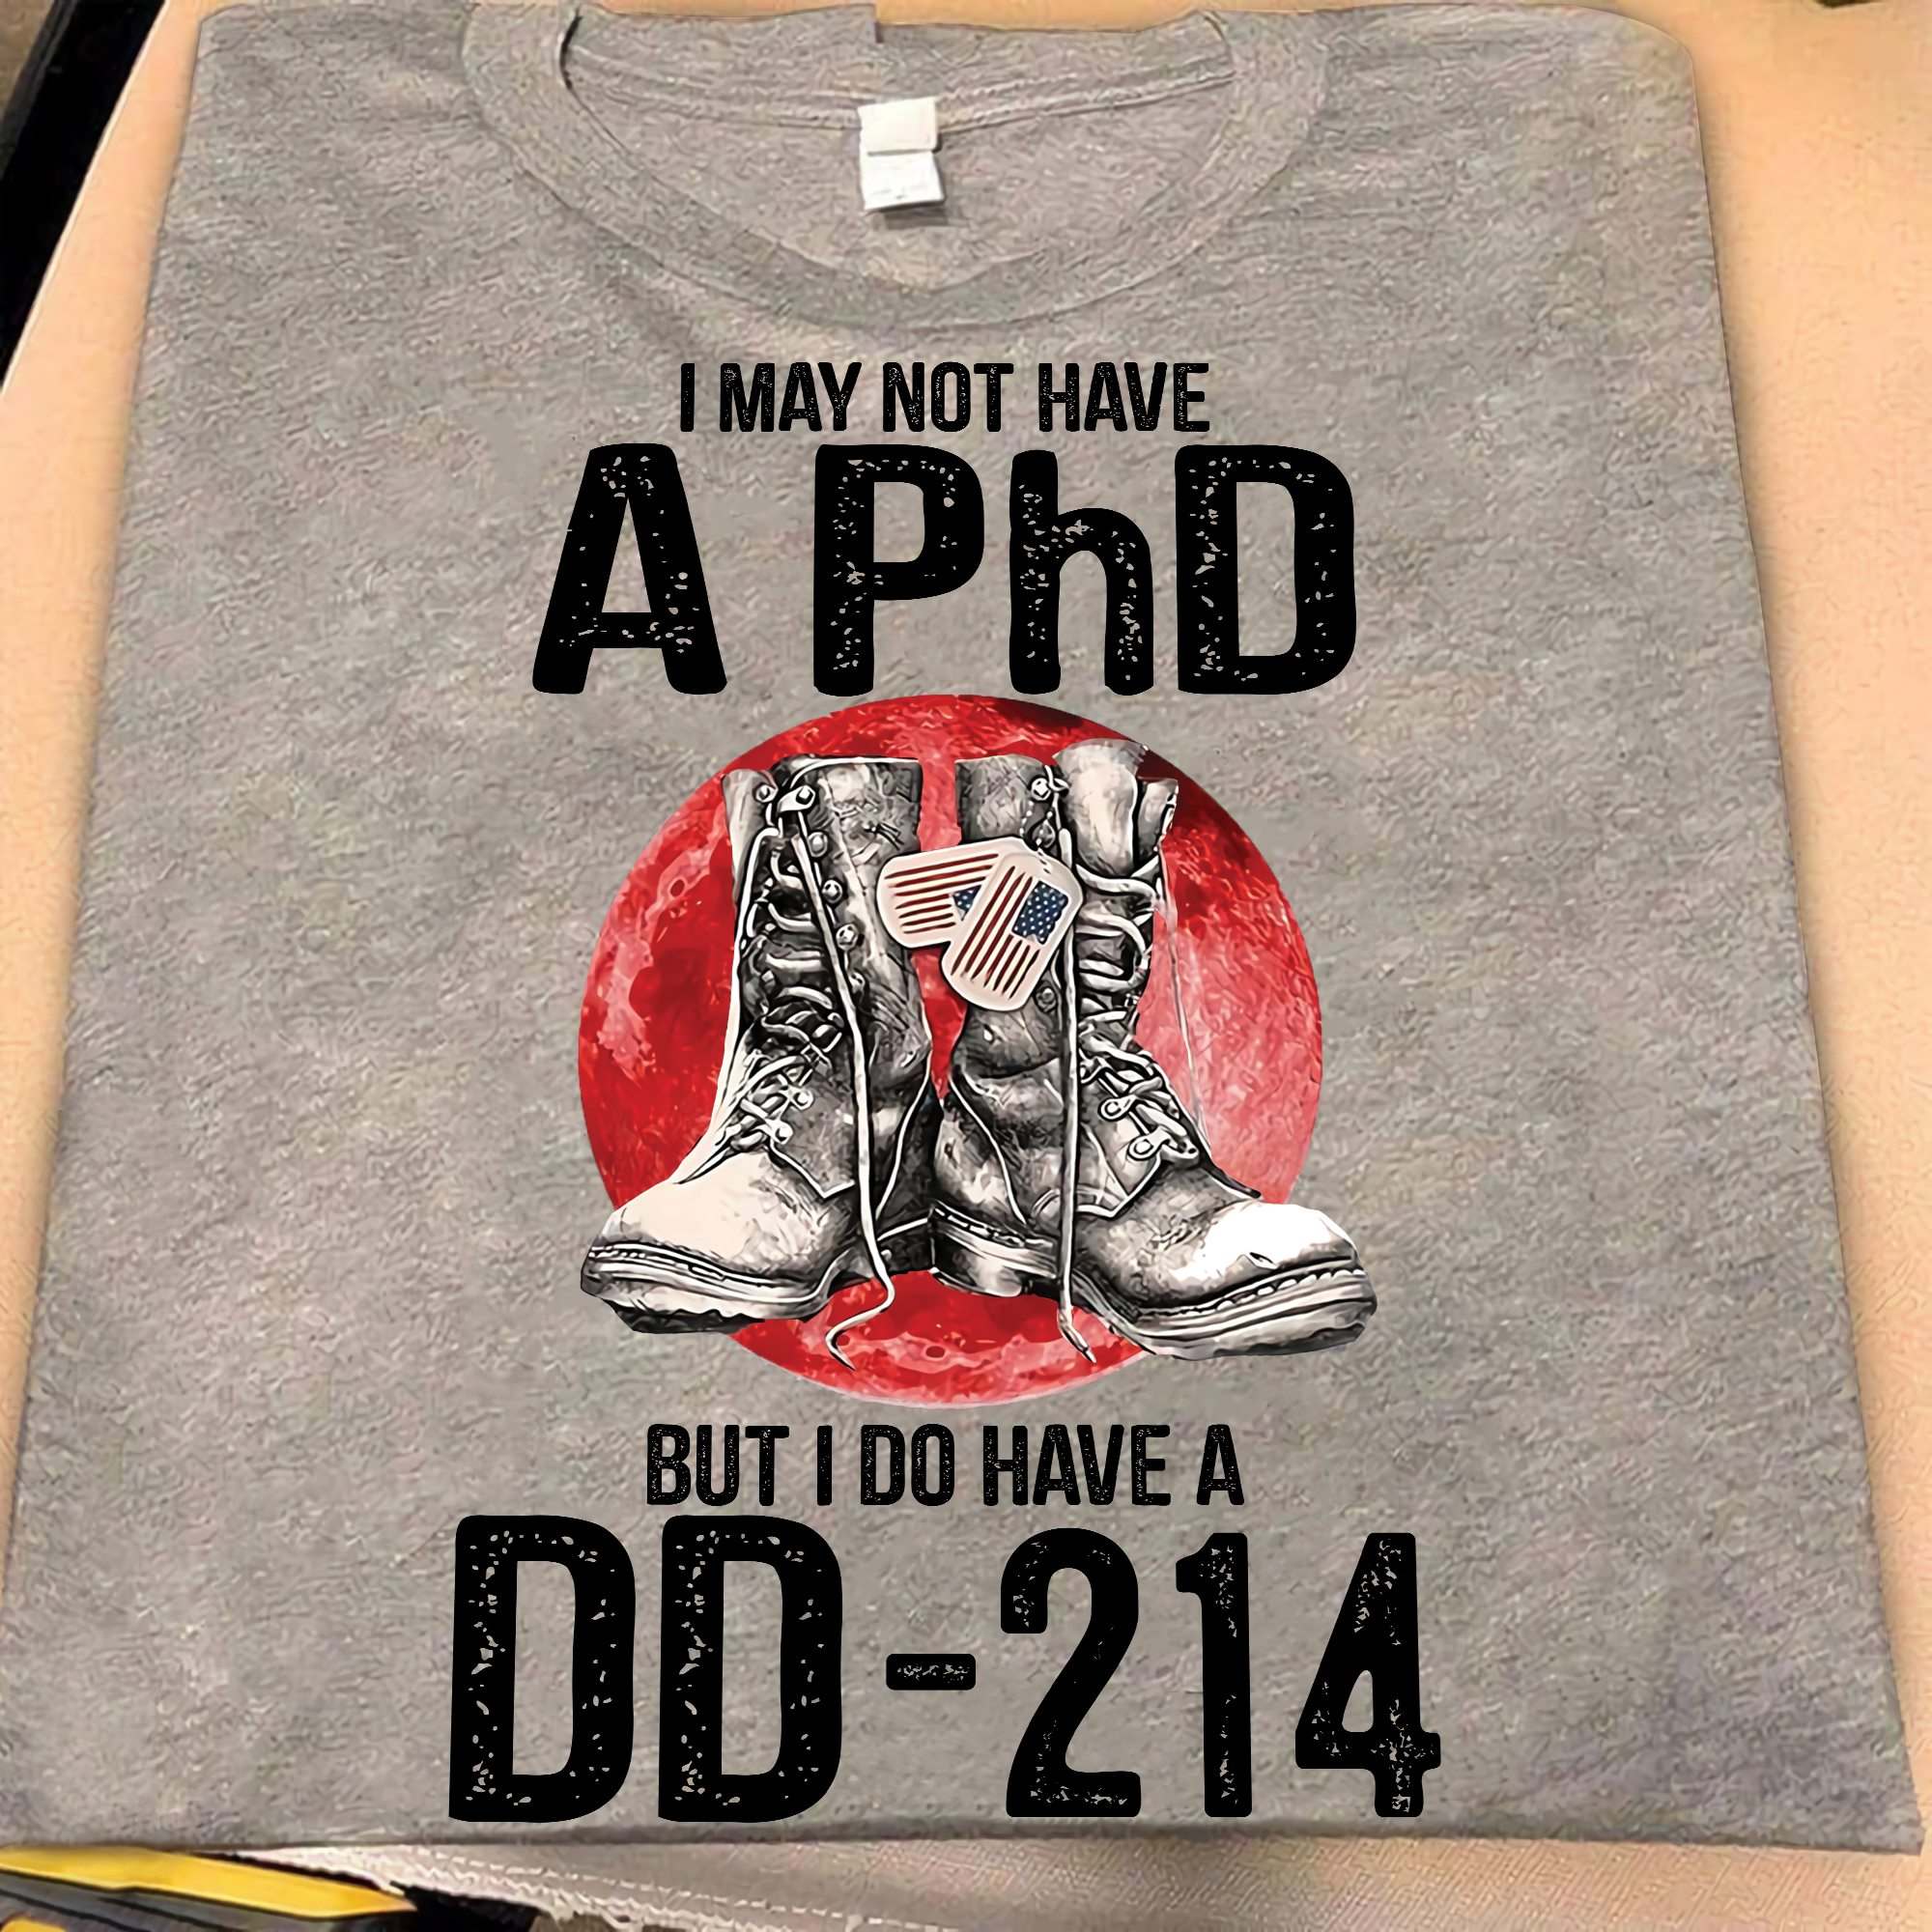 I may not have A PhD but I do have a DD-214 - Veteran shoes, American veteran